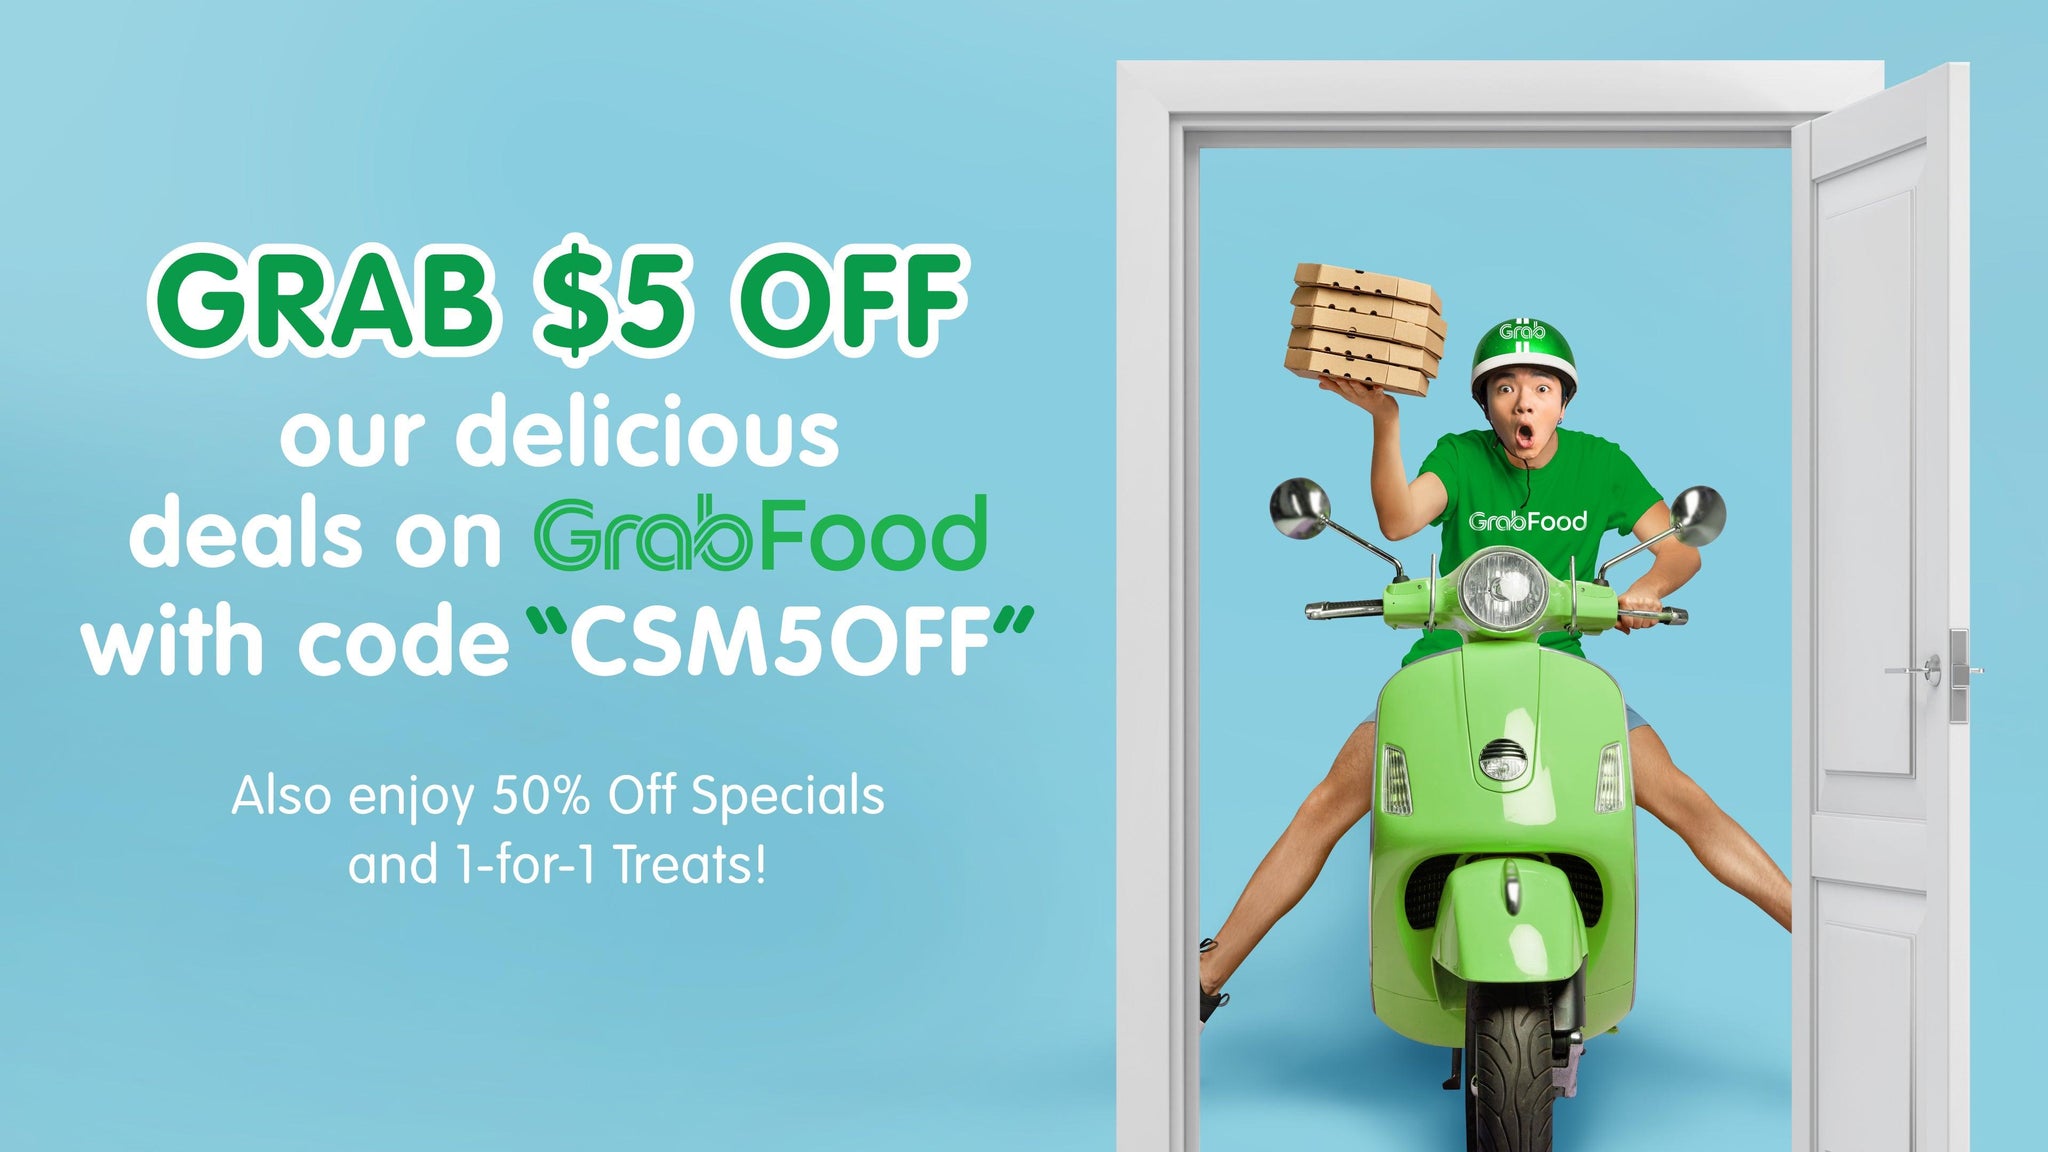 GrabFood $5 Promo Code + Other Special Offers For F&B Outlets At City Square Mall